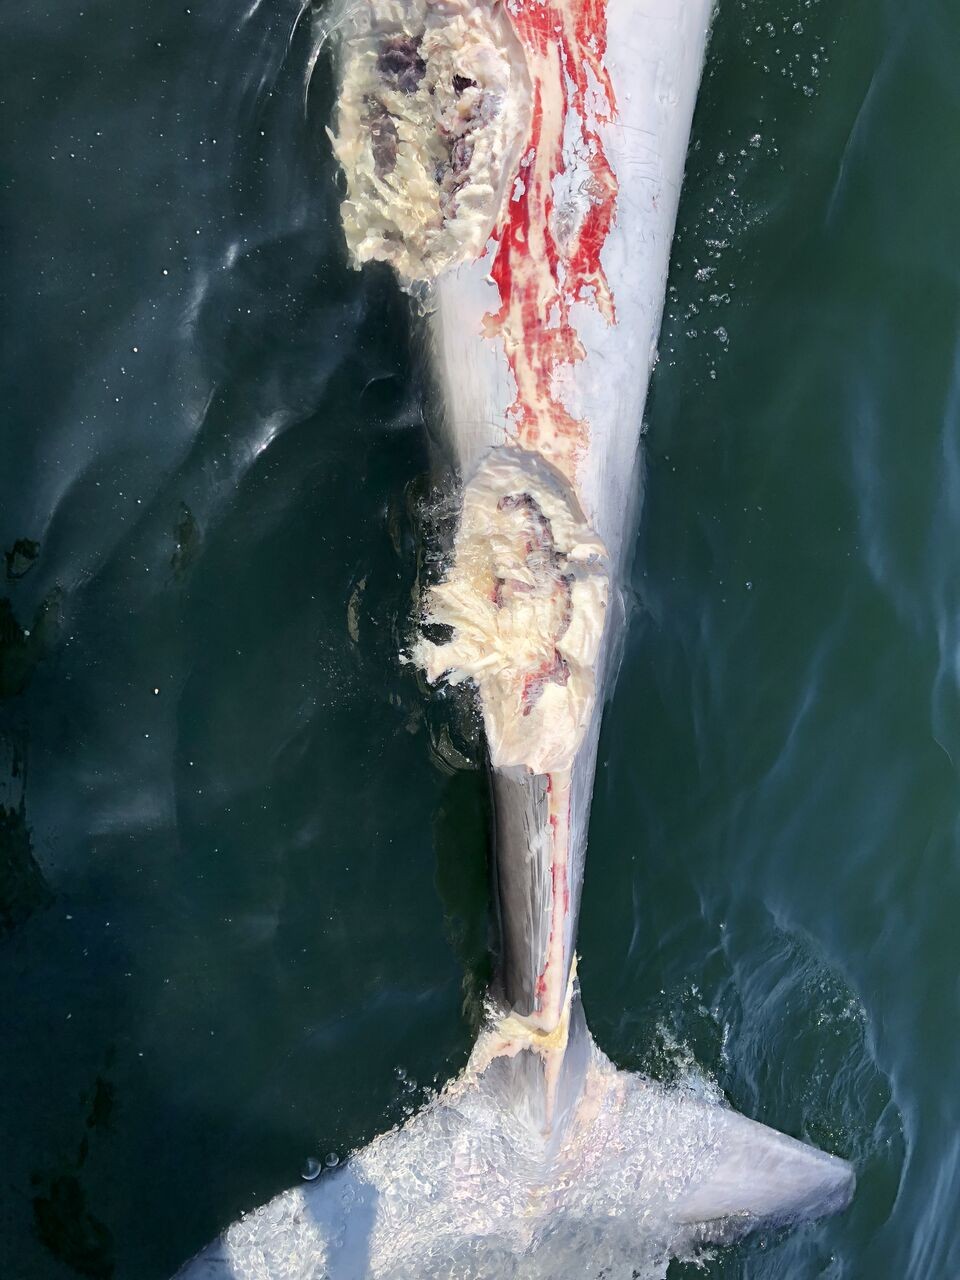 UNE researchers confirm bite marks on whale are from a great white shark